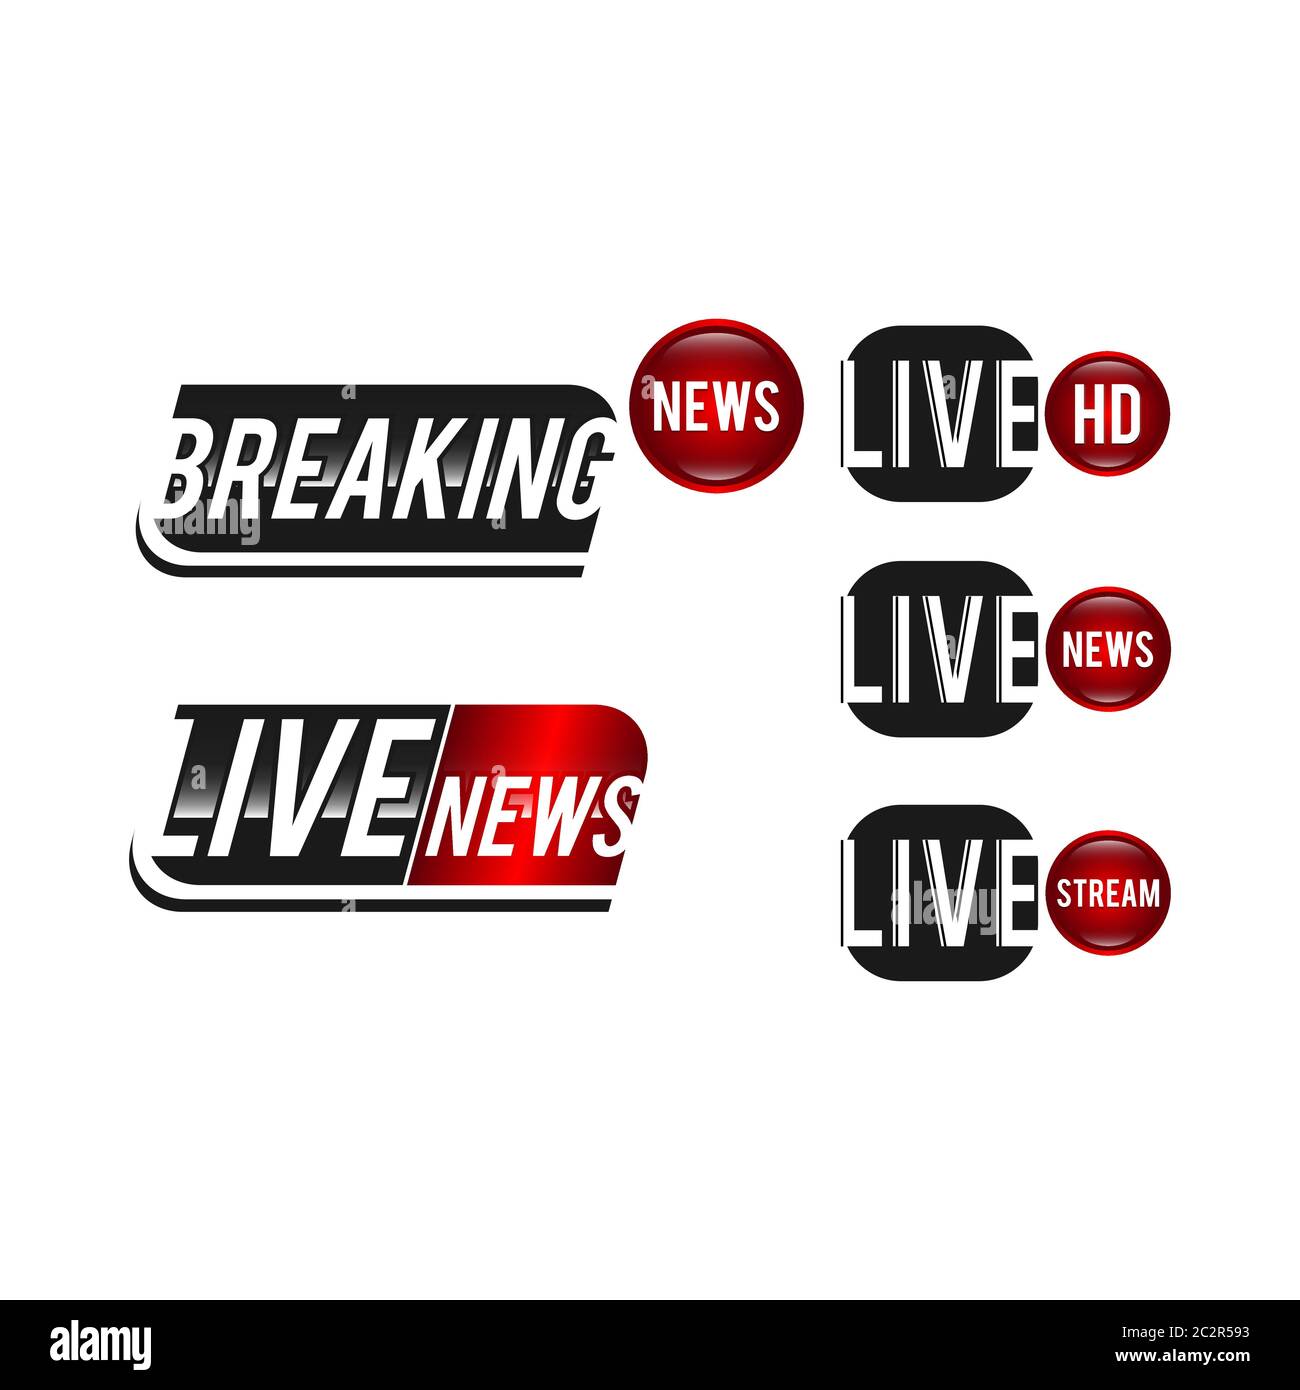 Vector tv news banner interface , news label strip or icon, live news, breaking news, full Hd, ultra HD, dramatization, live stream inscription. Red s Stock Vector